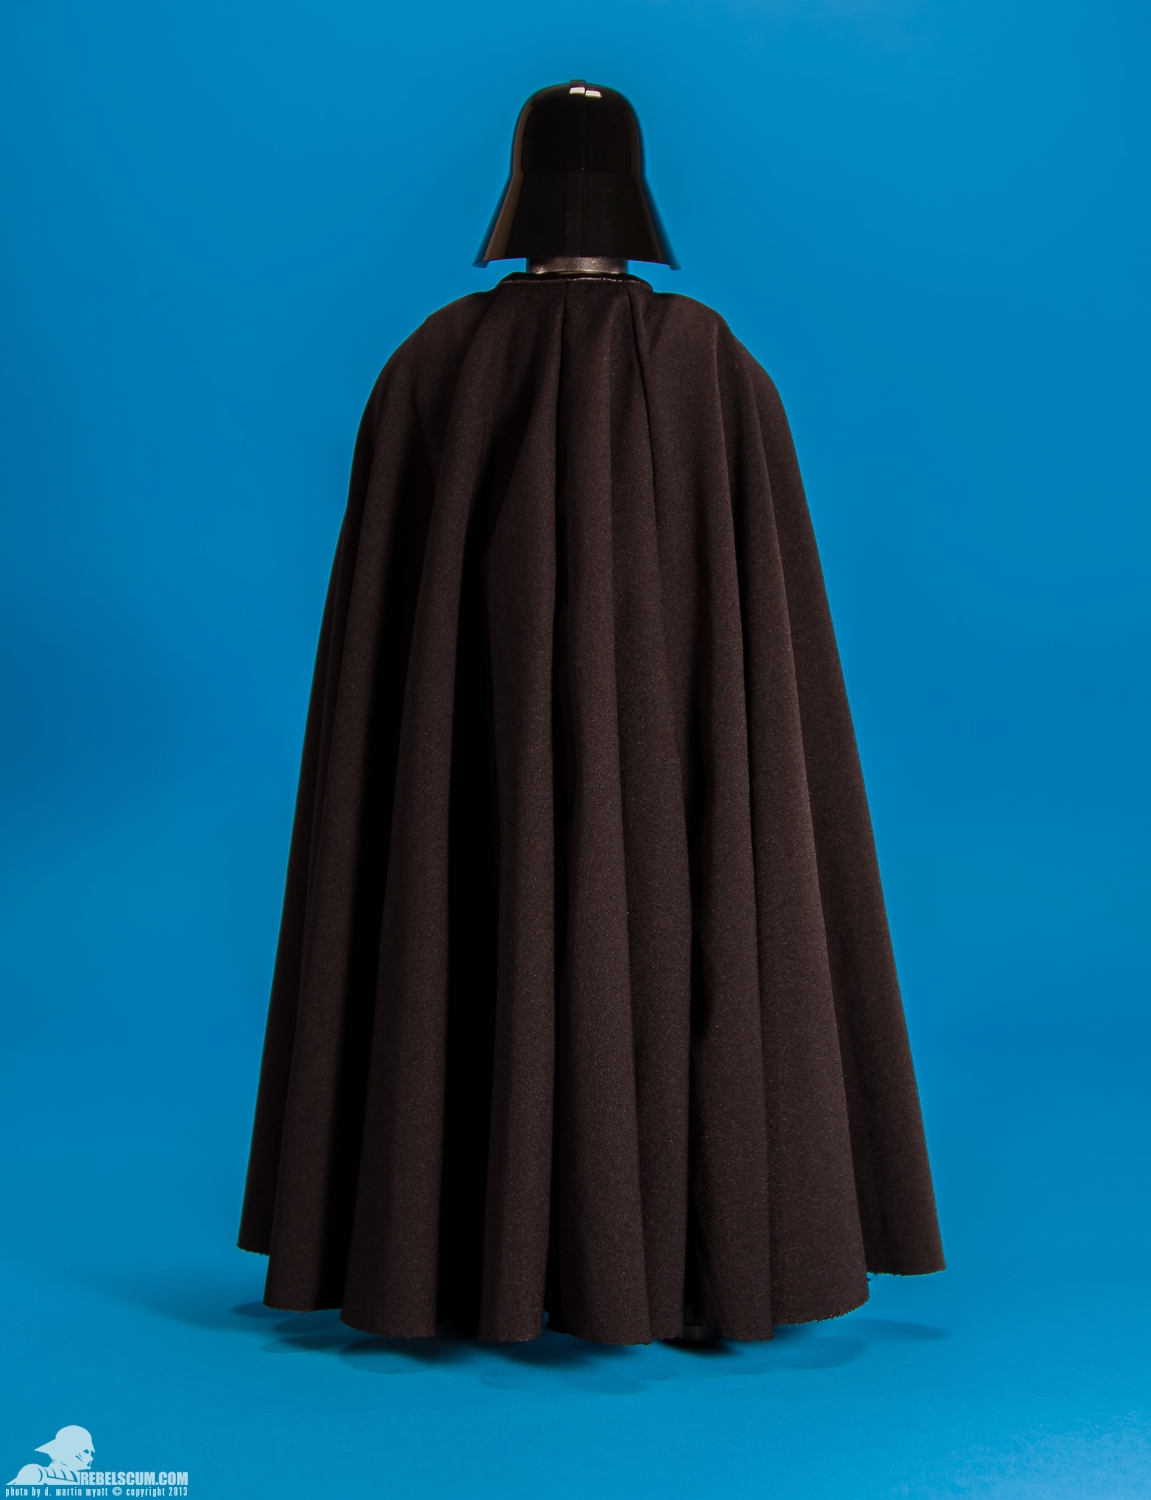 Darth-Vader-Return-Of-The-Jedi-Sixth-Scale-Sideshow-Collectibles-004.jpg